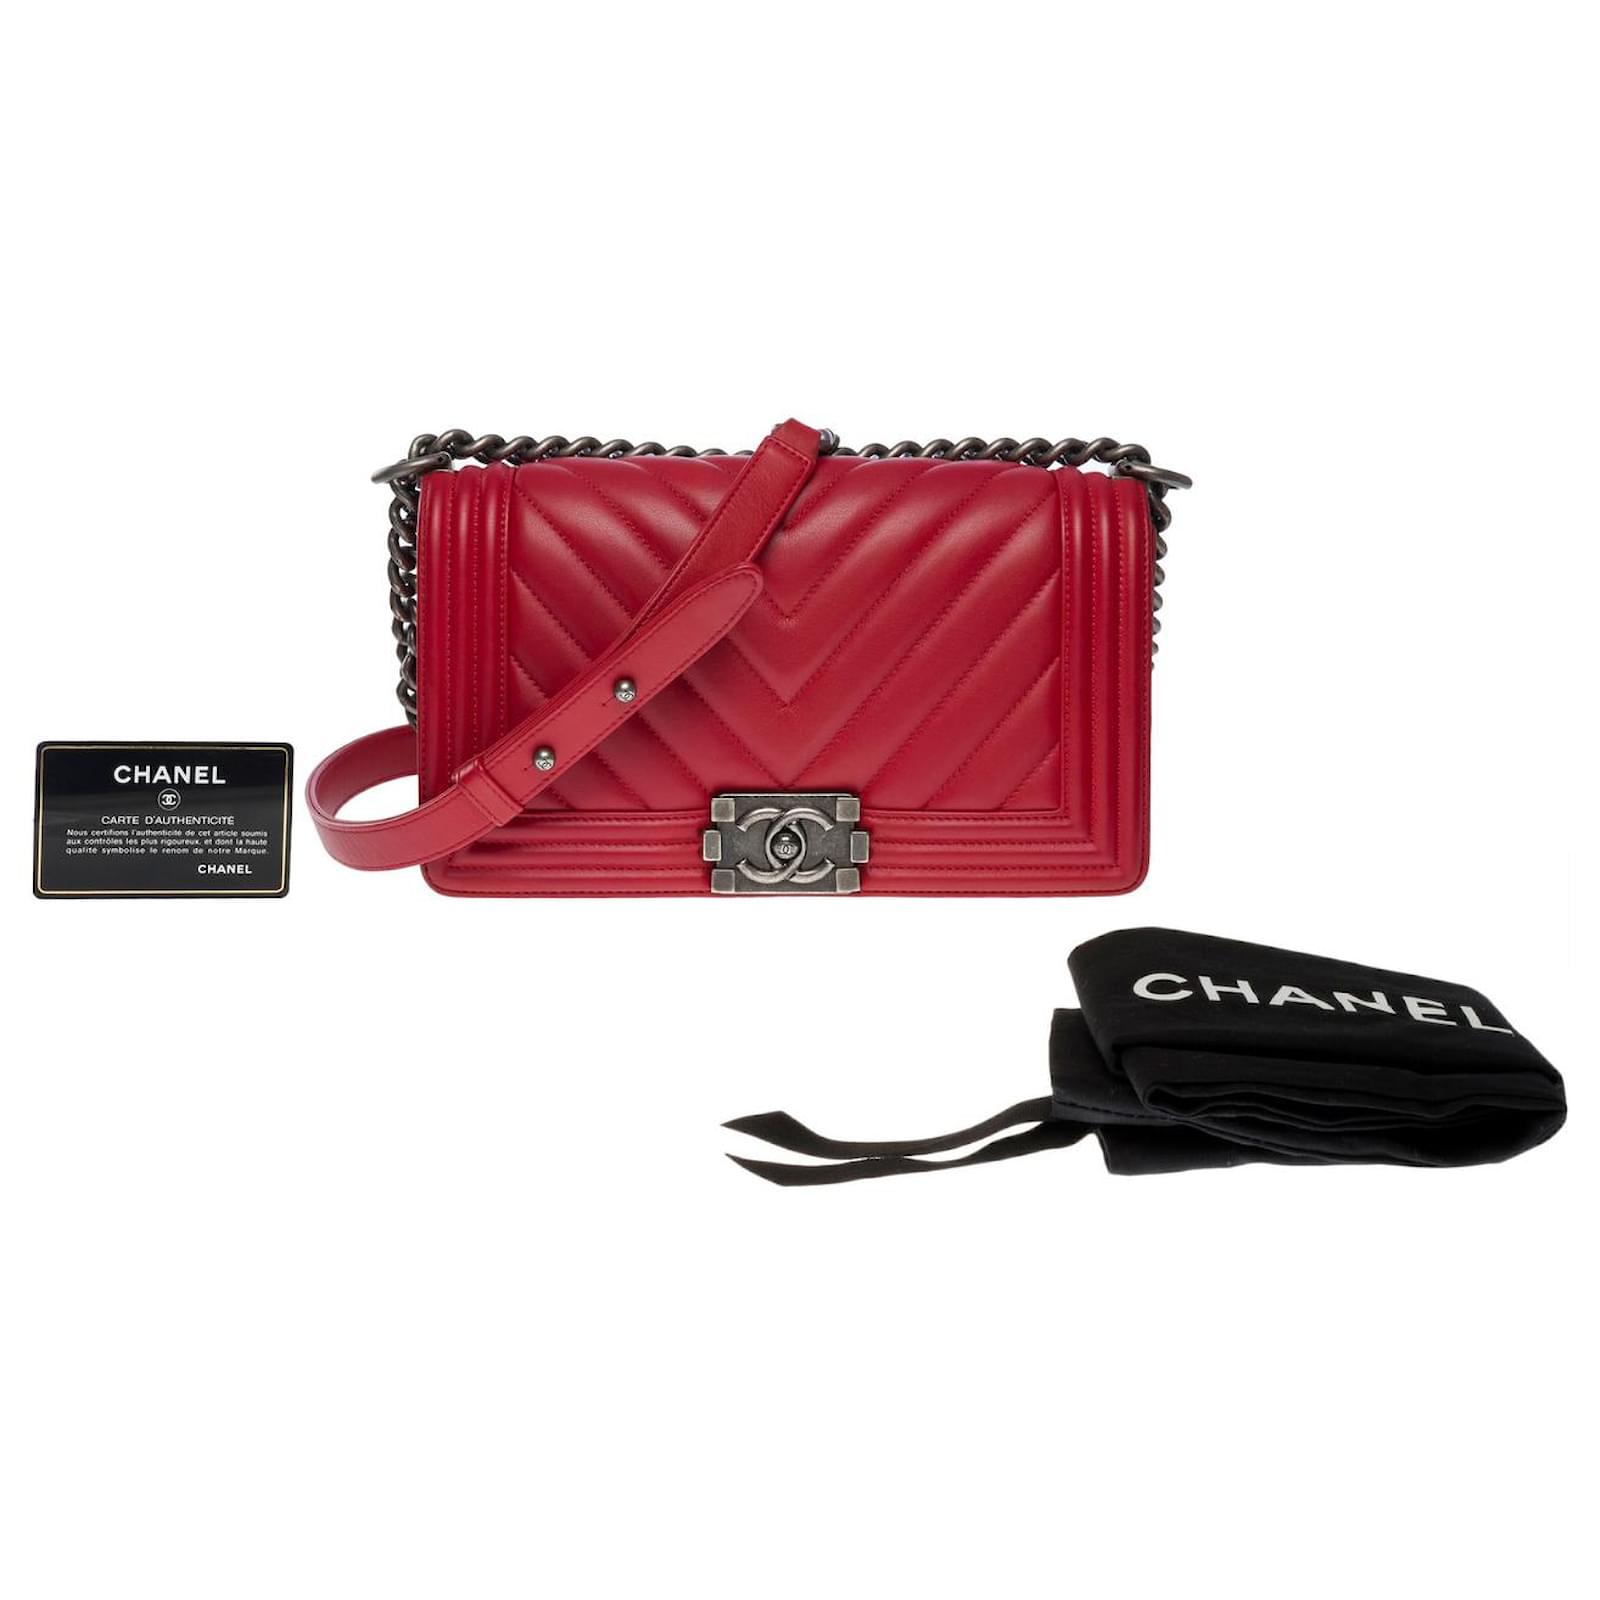 Misc Chanel Chanel Boy Bag in Red Leather - 101207